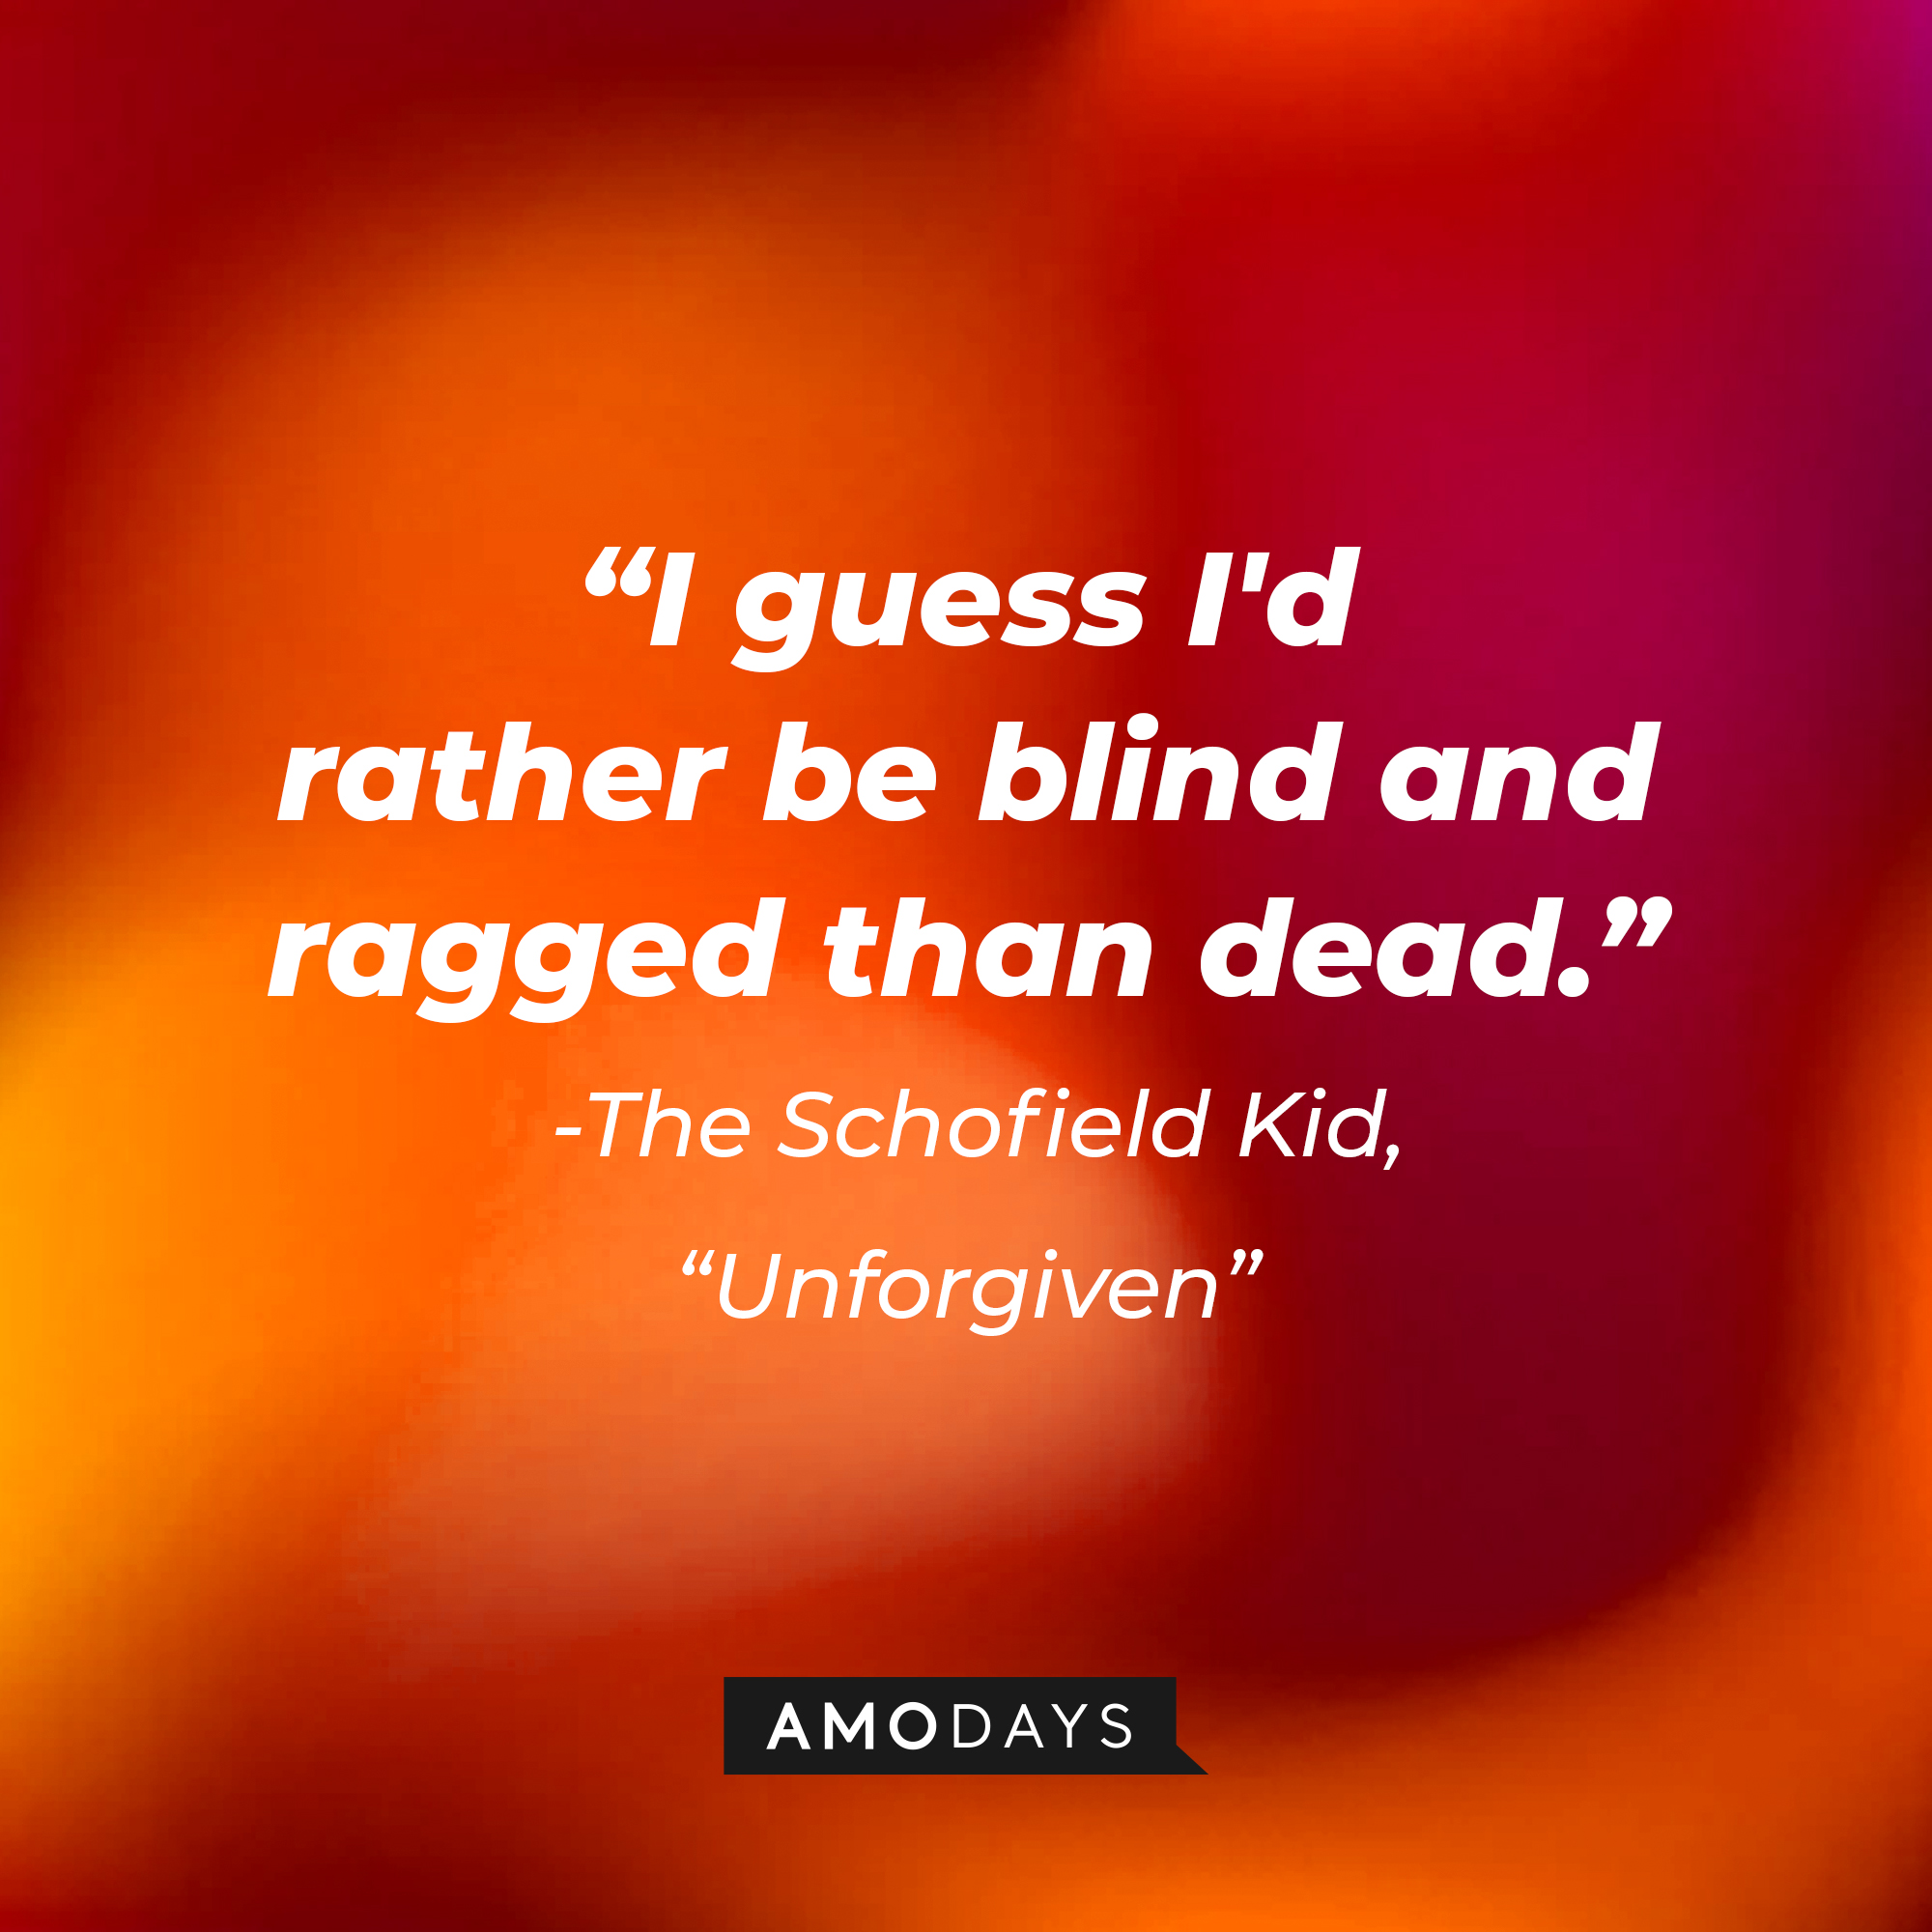 The Schofield Kid's quote in "Unforgiven:" "I guess I'd rather be blind and ragged than dead." | Source: AmoDays